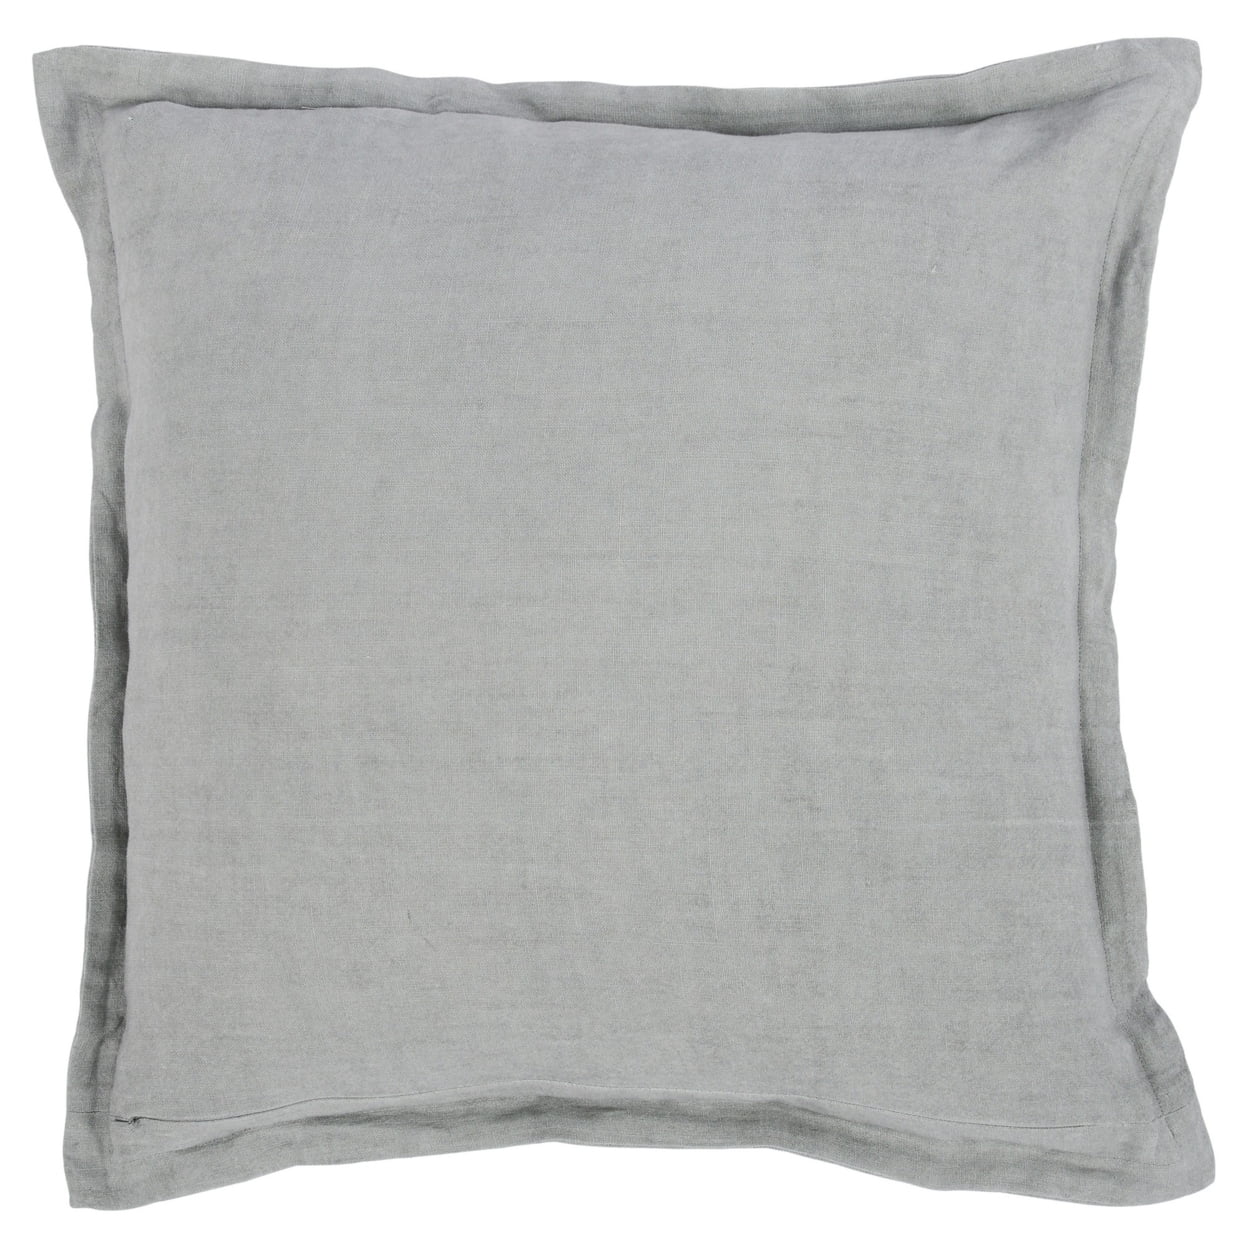 Picture of Benjara BM283471 22 x 22 in. Pixie Square Soft Fabric Accent Throw Pillow with Flange Edges - Gray